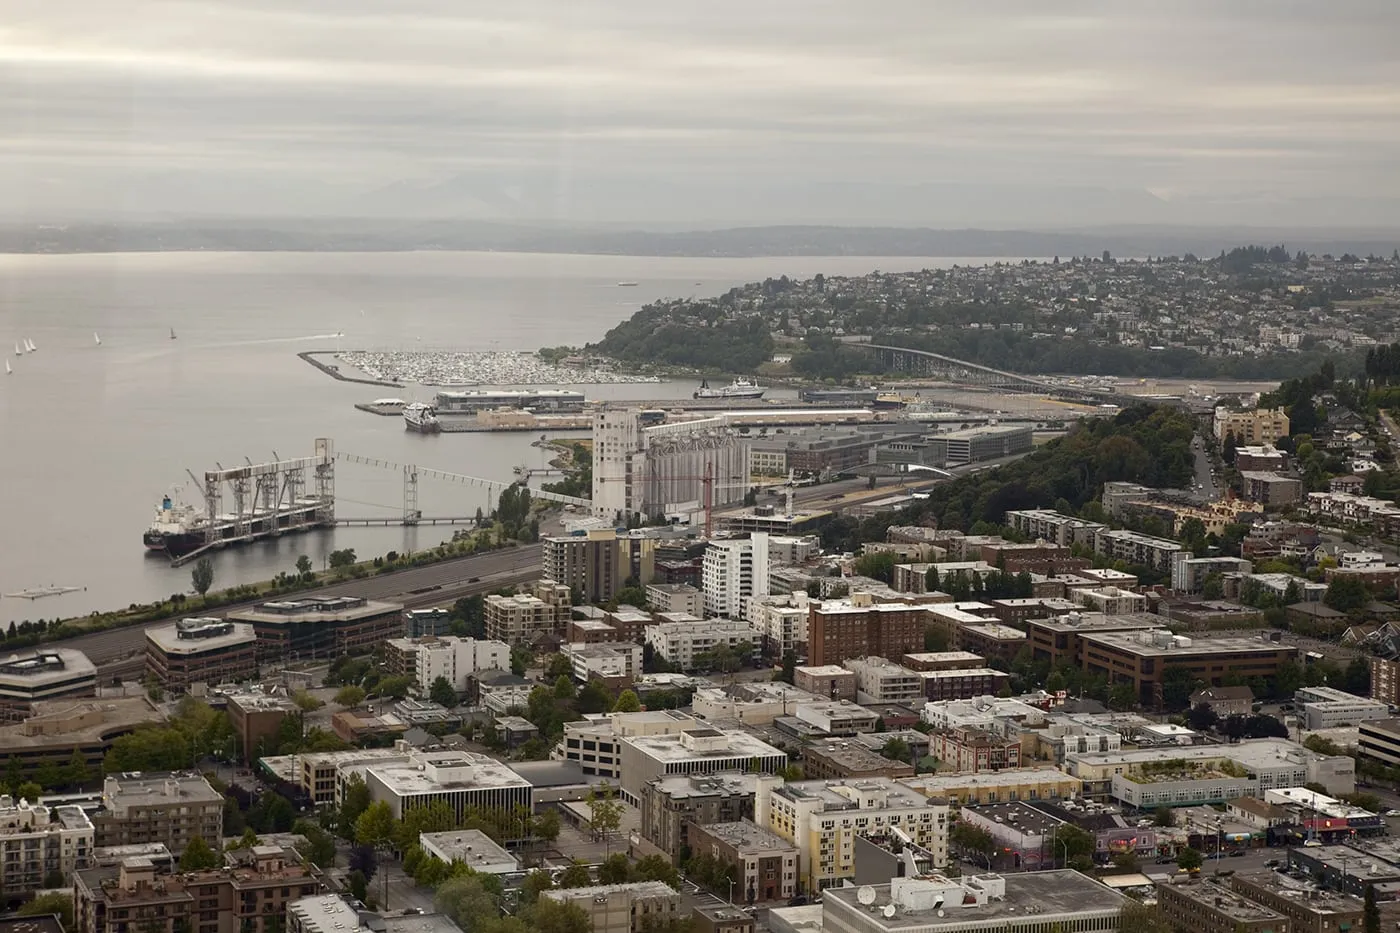 View from the Space Needle in Seattle, Washington.